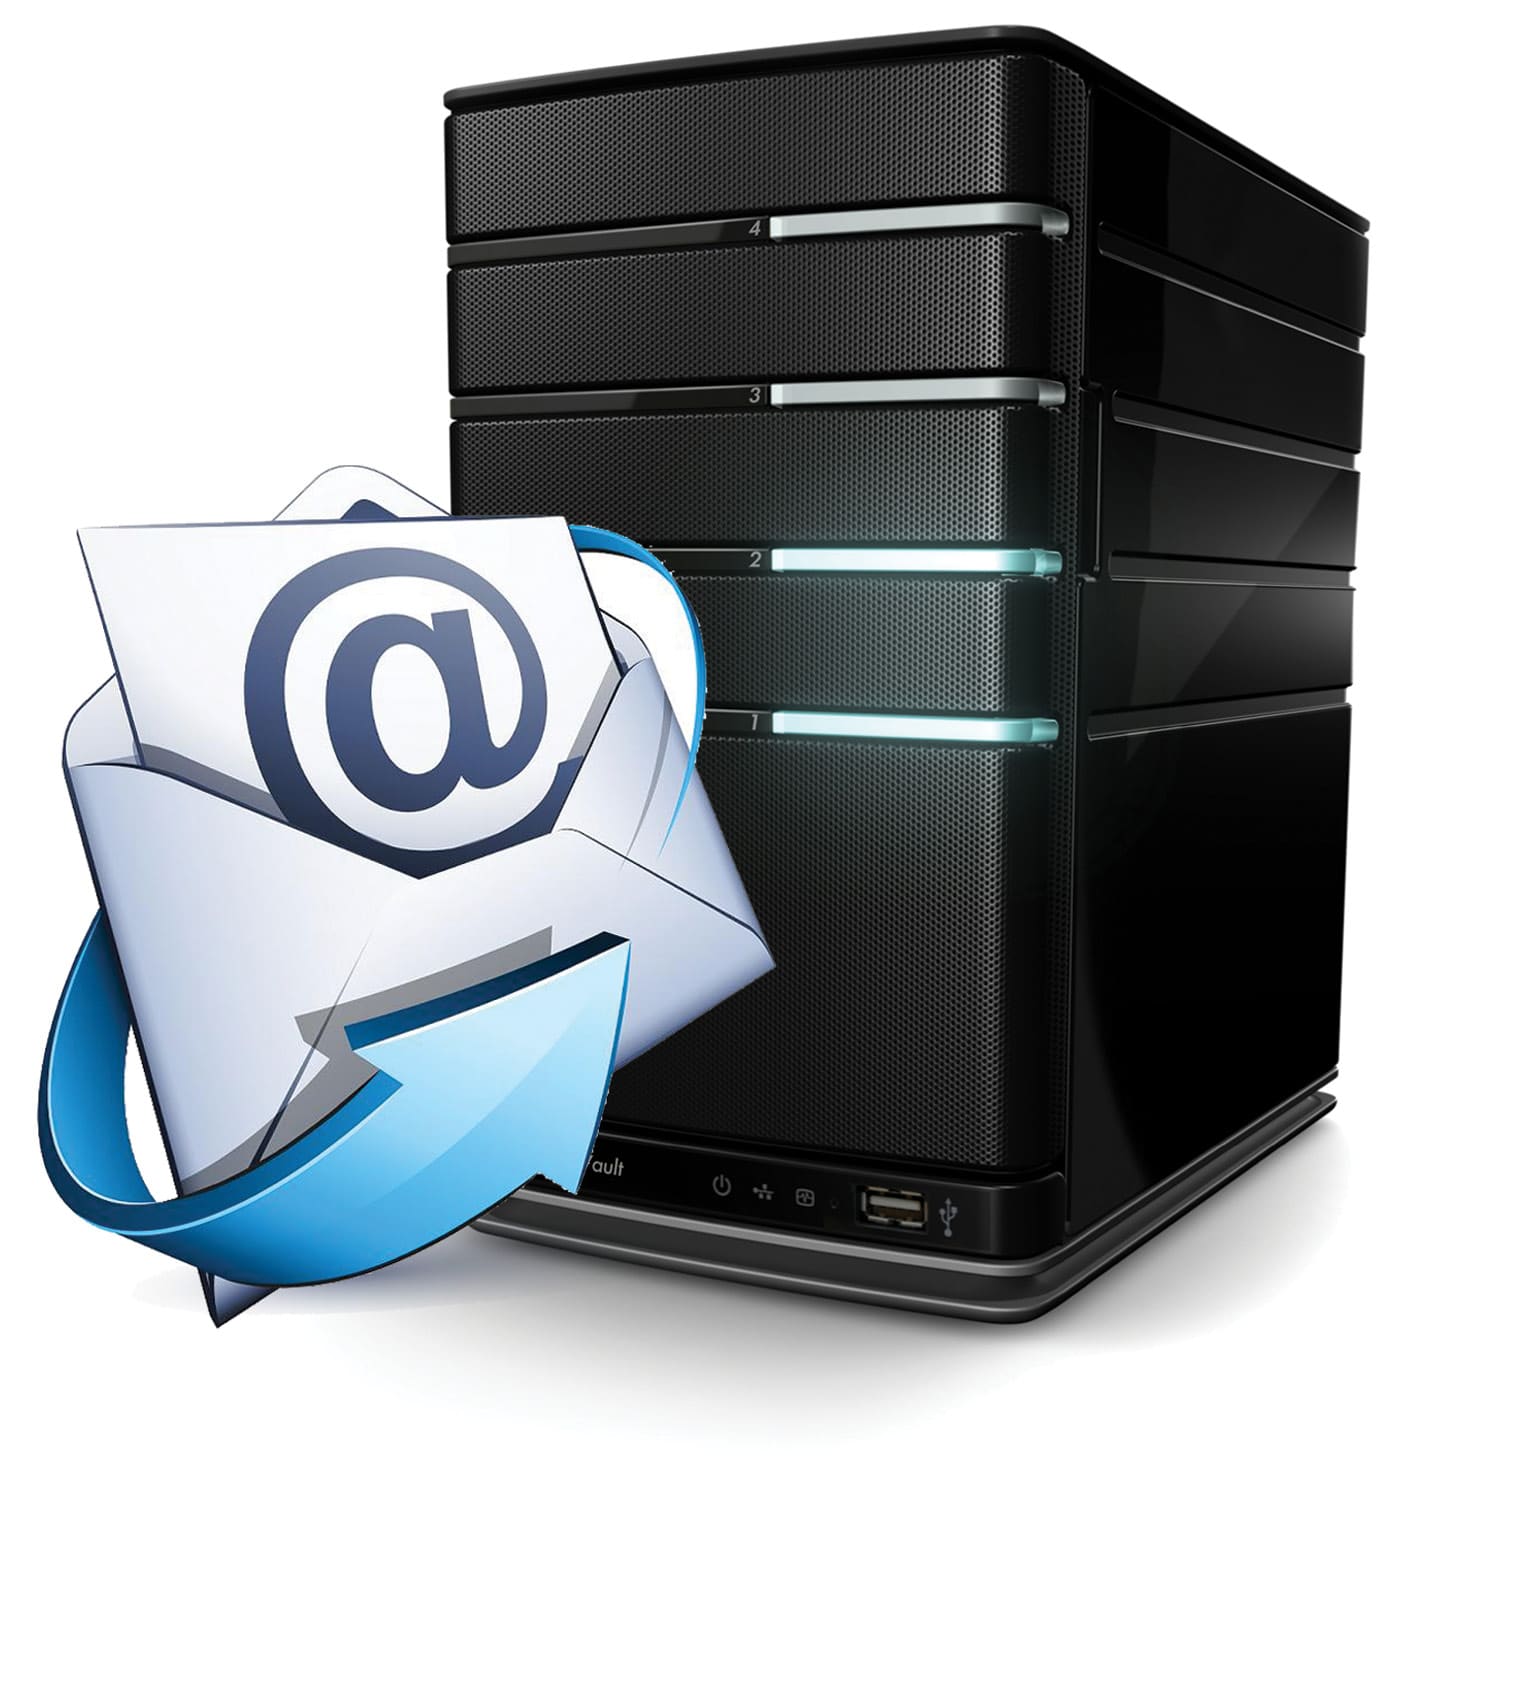 Setting Up Your Own Mail Server Can Be Fun! - Open Source For You